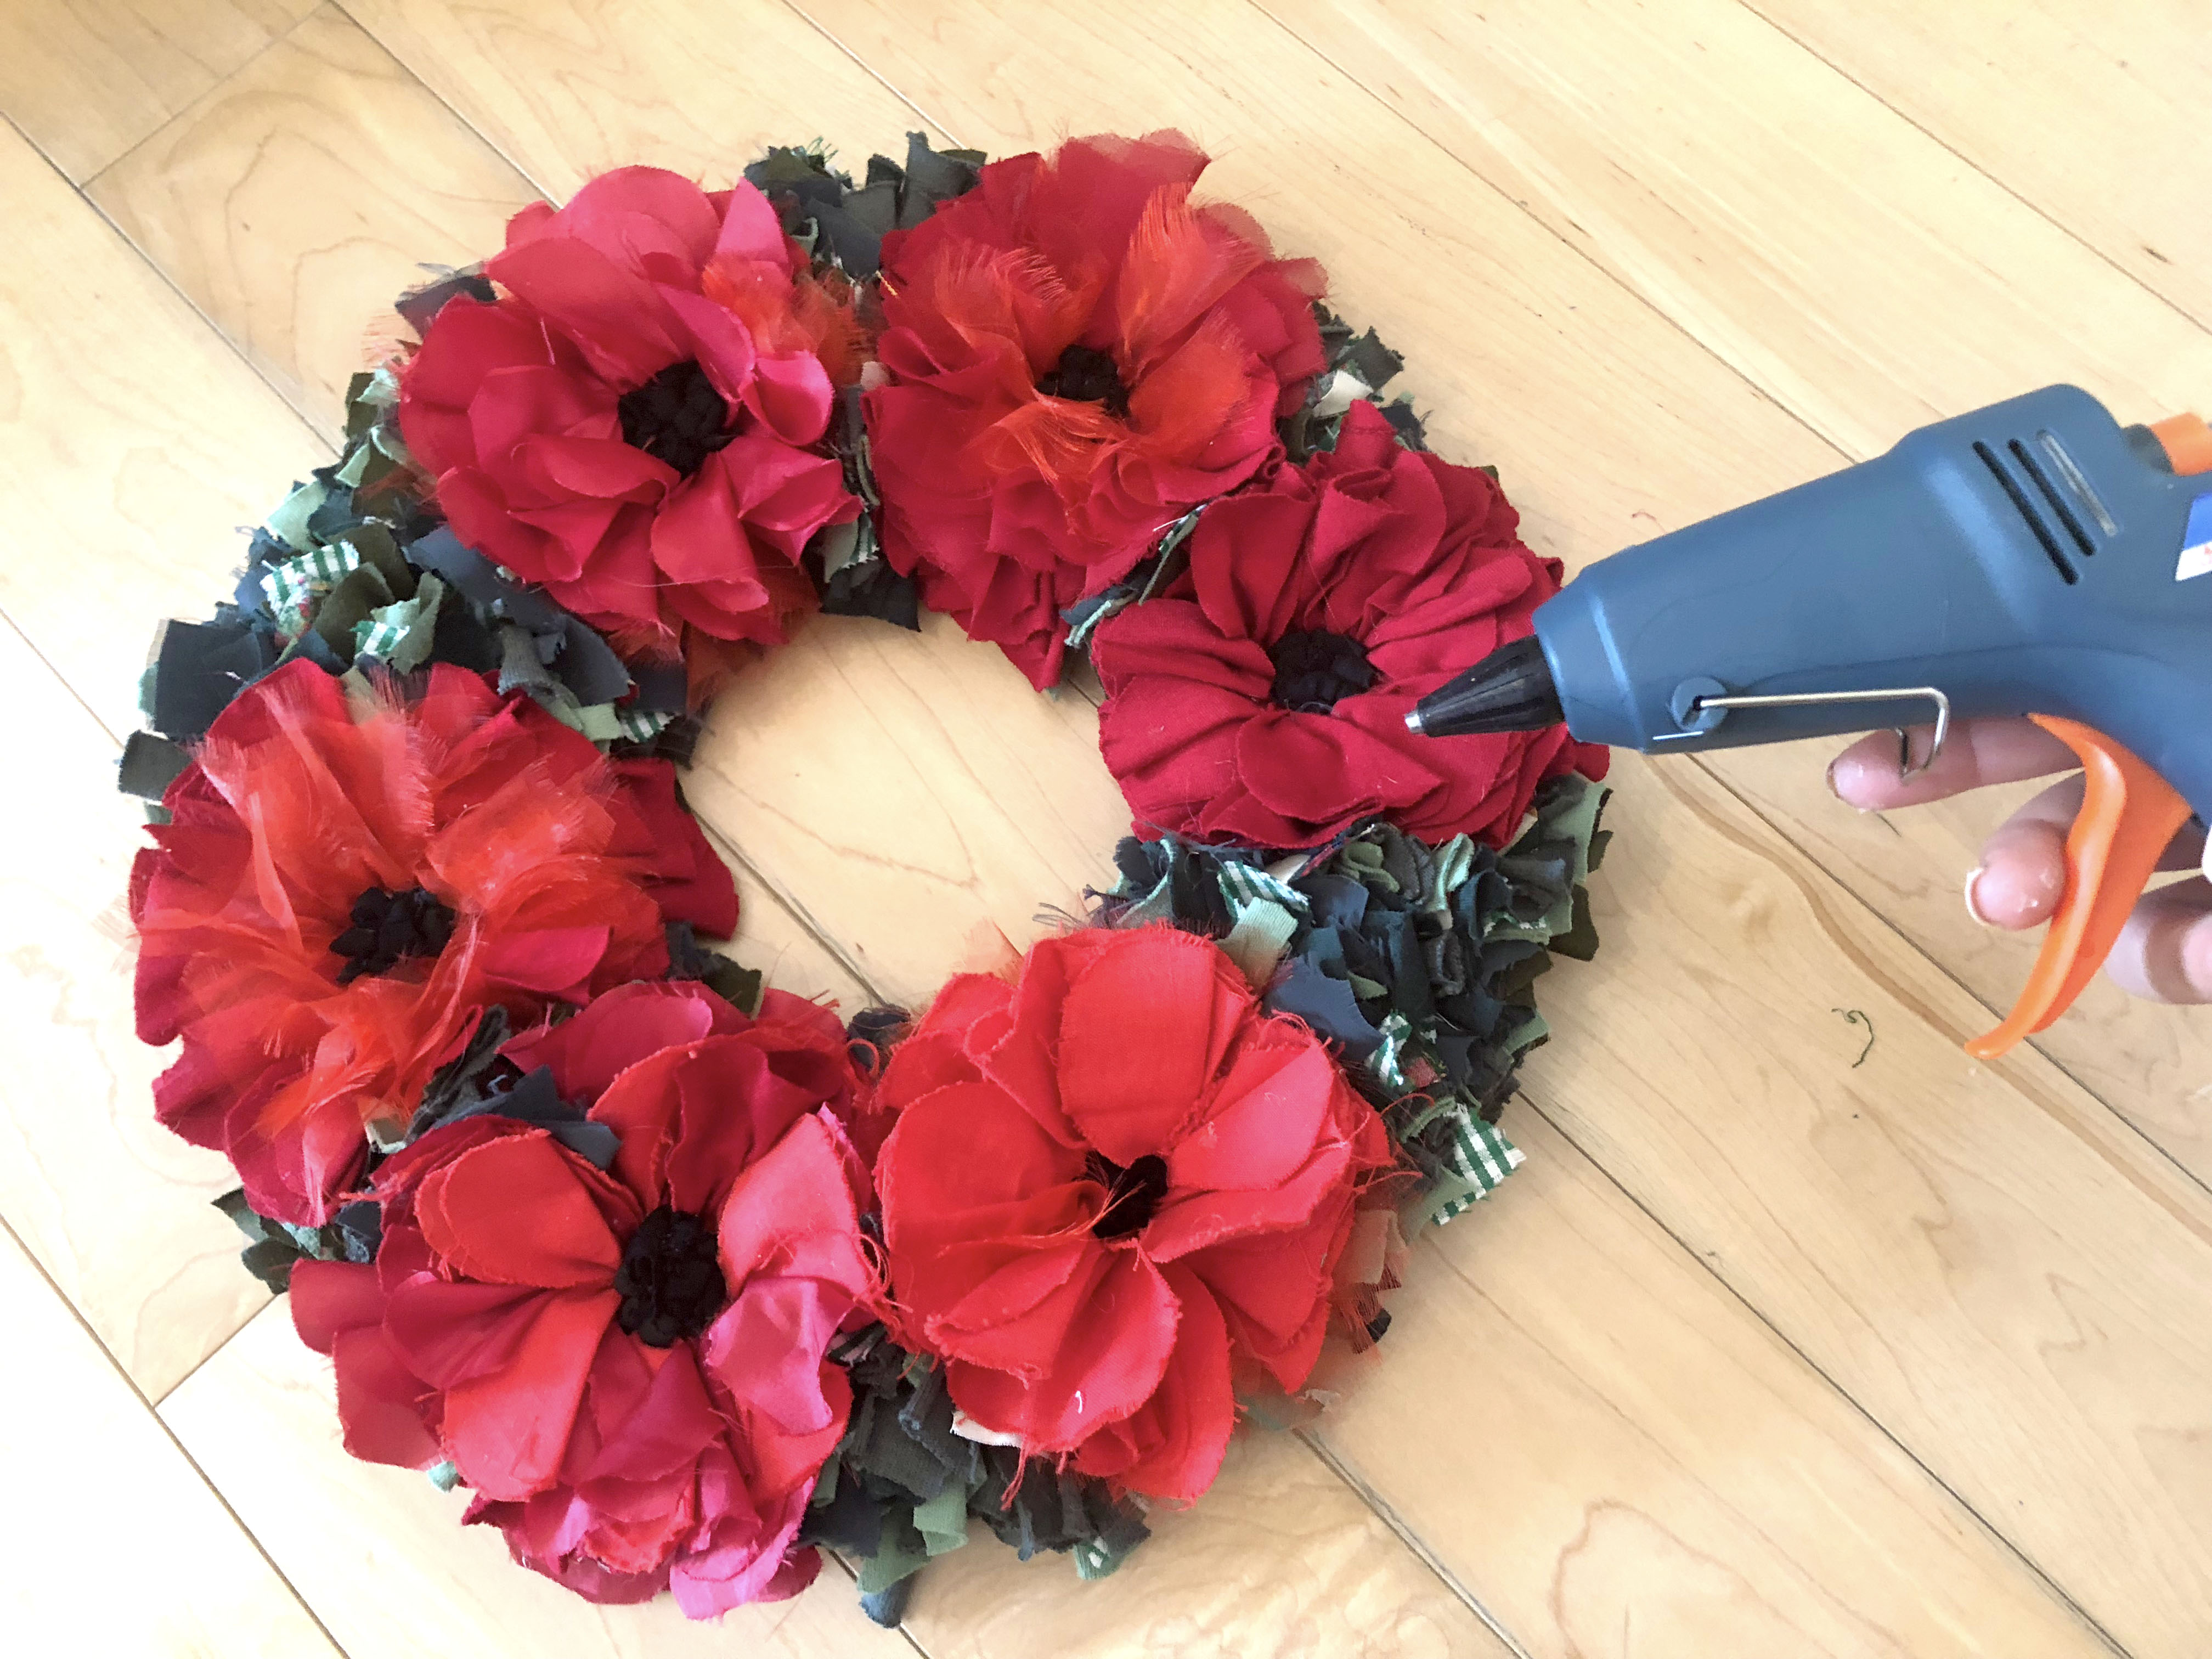 Rag rug poppy wreath made of recycled fabrics in red, black and green